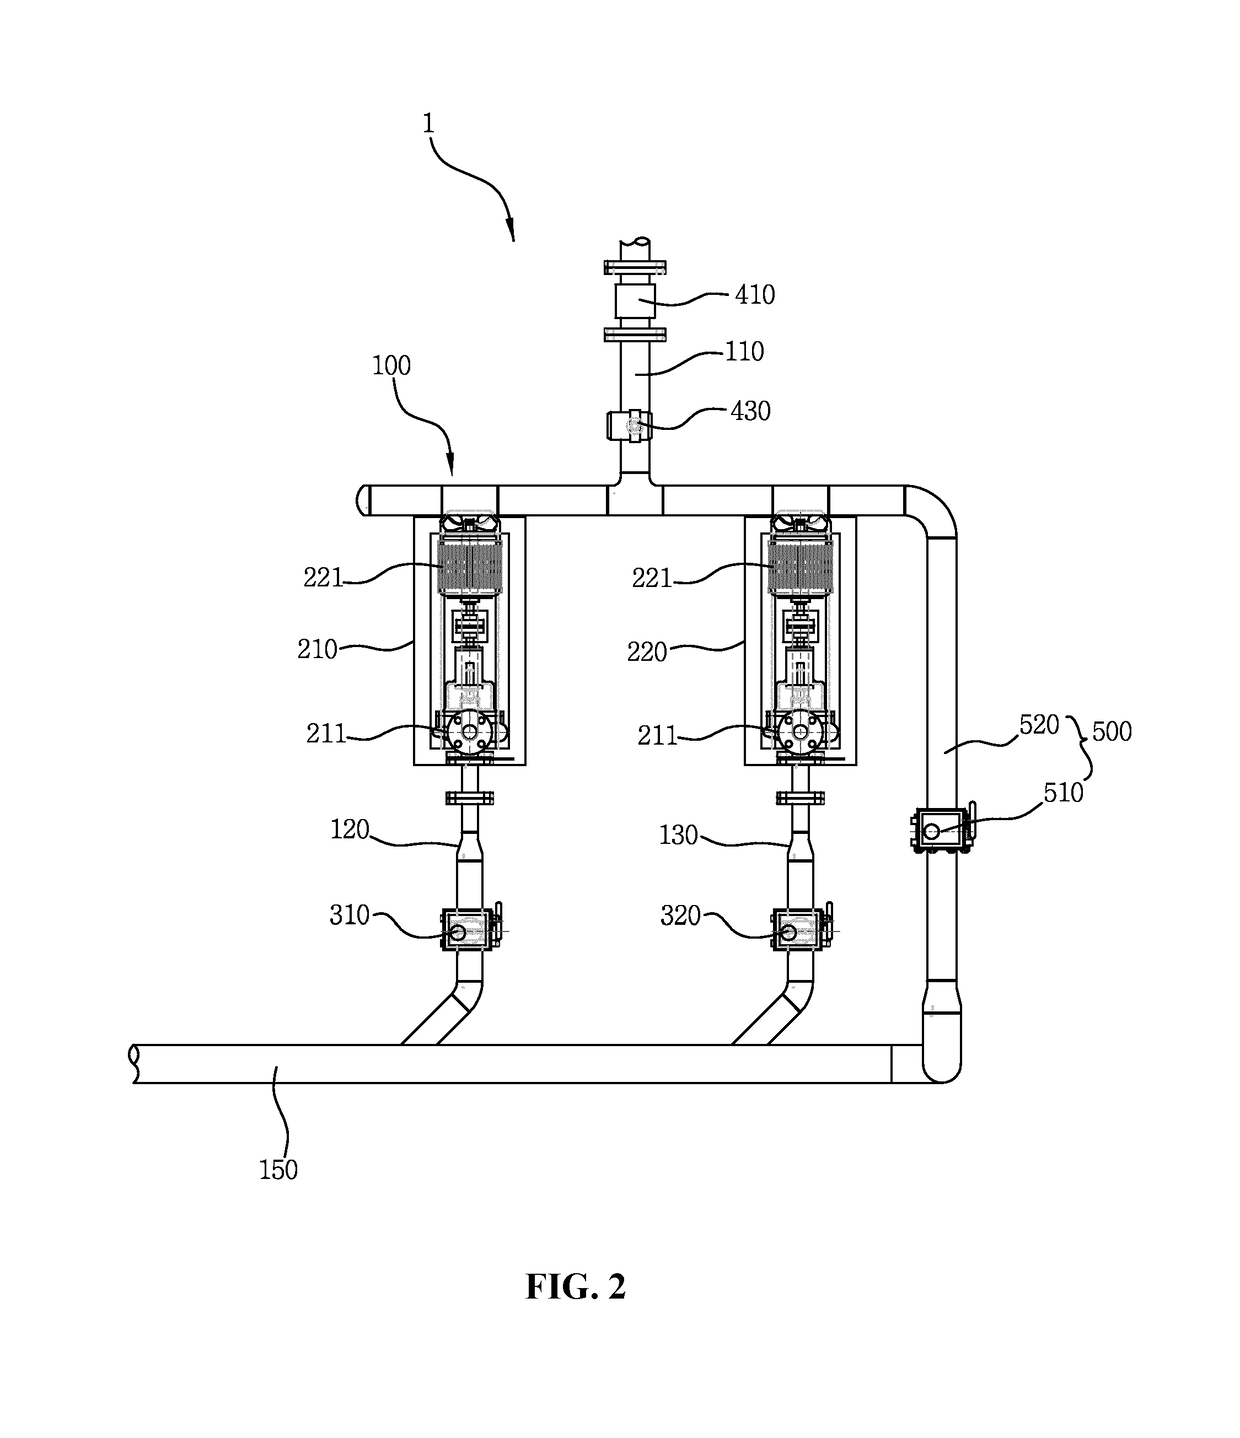 Stepwise operating parallel type small hydro power generation system having fixed flow path